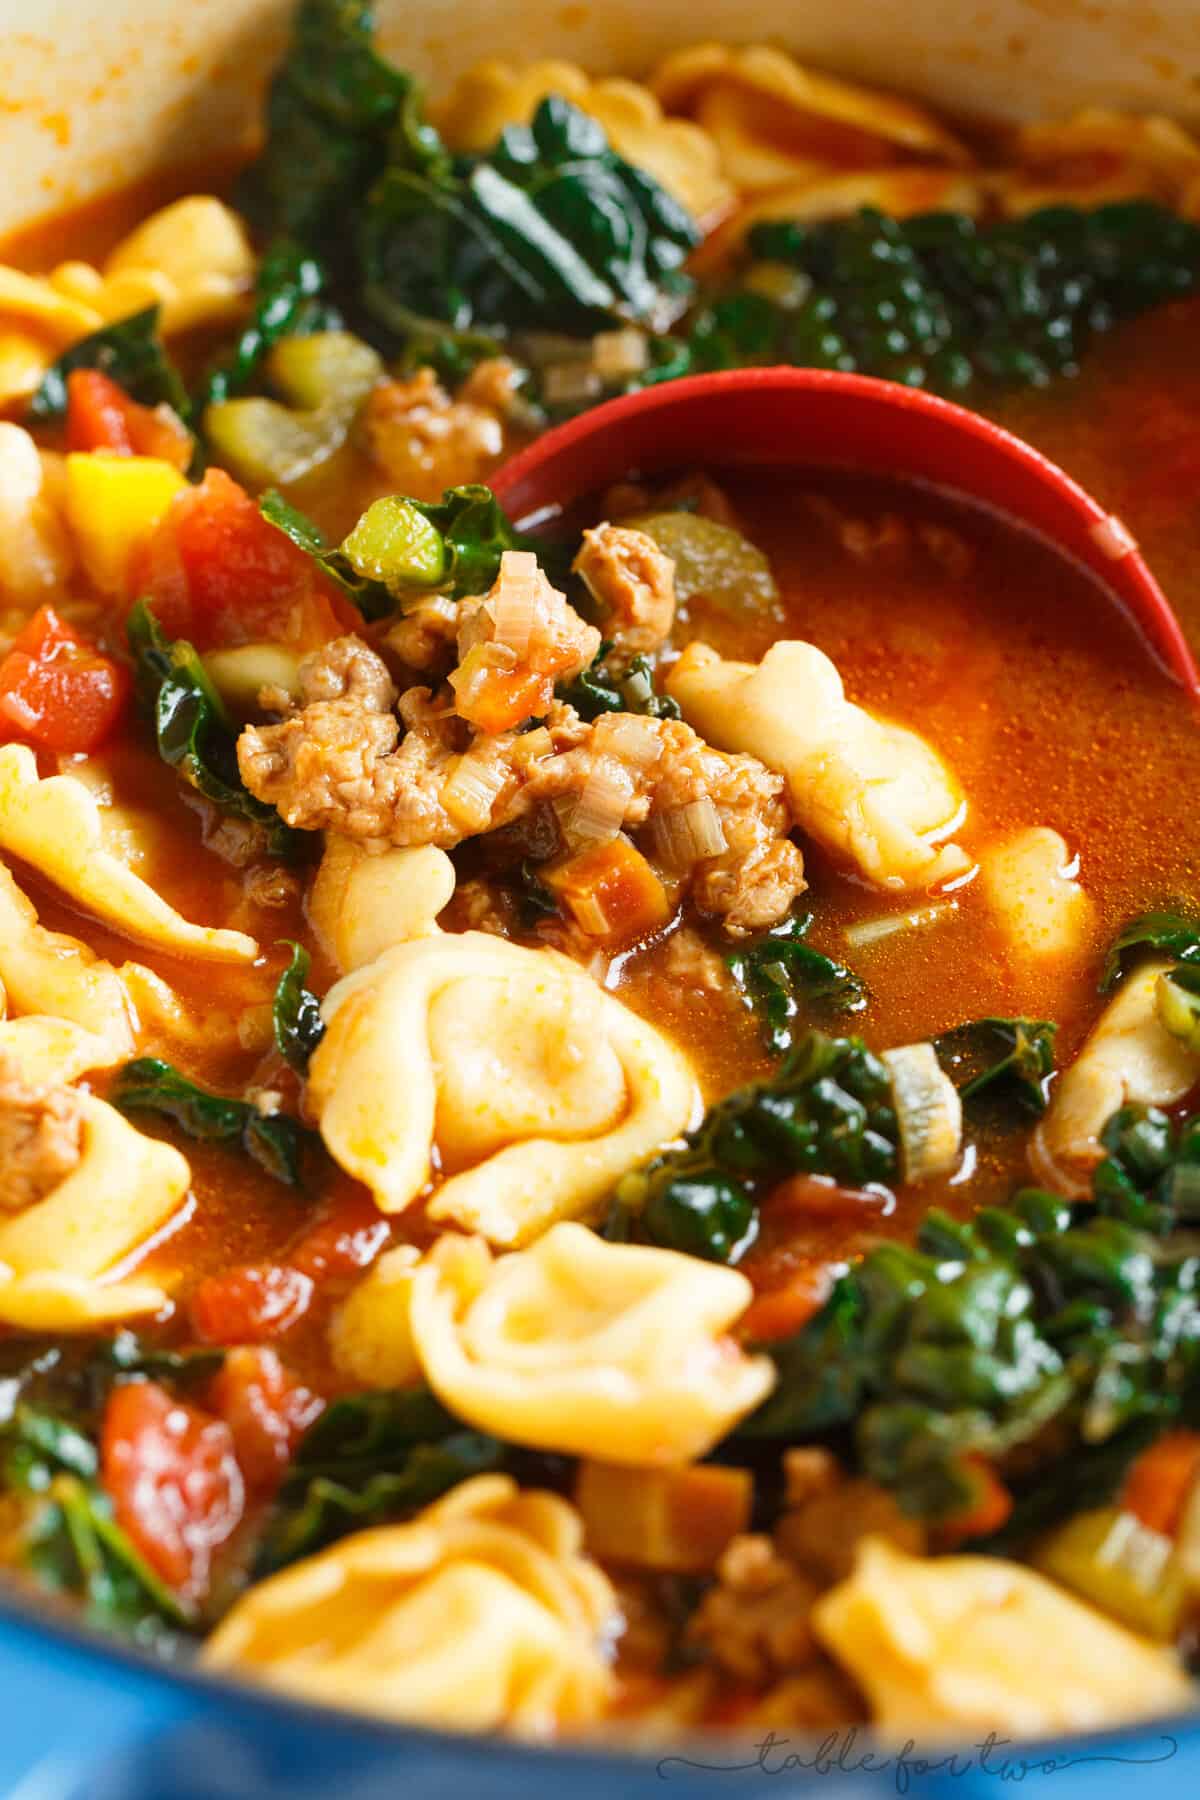 This spicy sausage and vegetable tortellini soup is exactly what you need when cold weather hits! Chock-full of veggies and cheesy tortellini; this soup will warm you right up! #HuntsDifference #ad